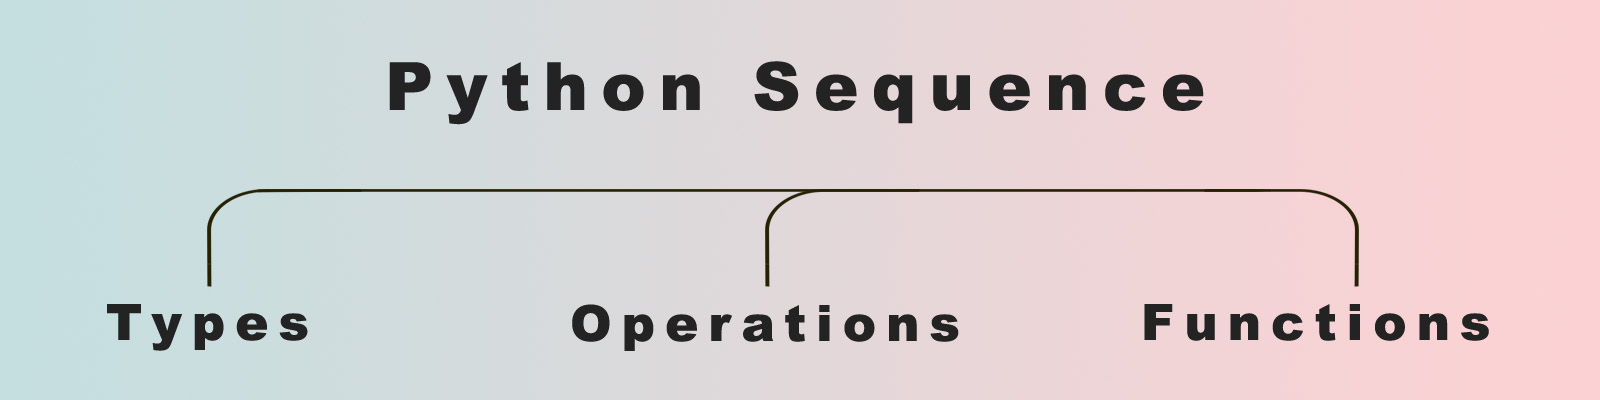 Python Sequence Types Operations Functions